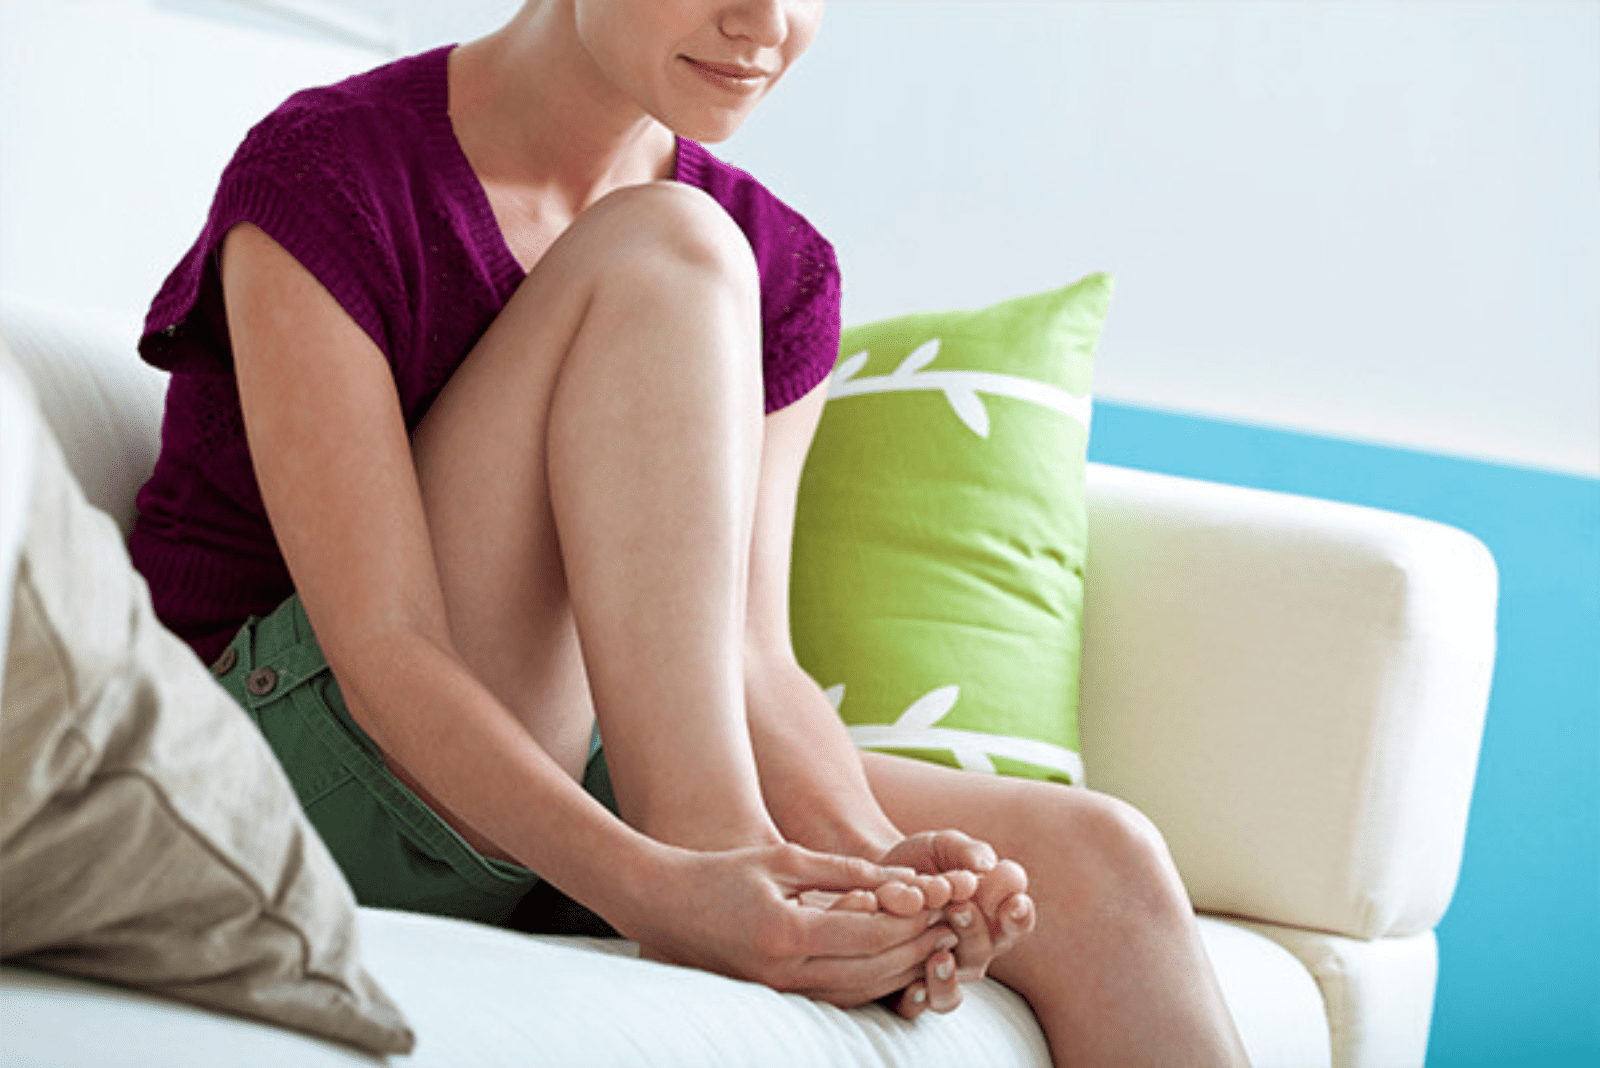 a woman is sitting on the couch and scratching her right foot